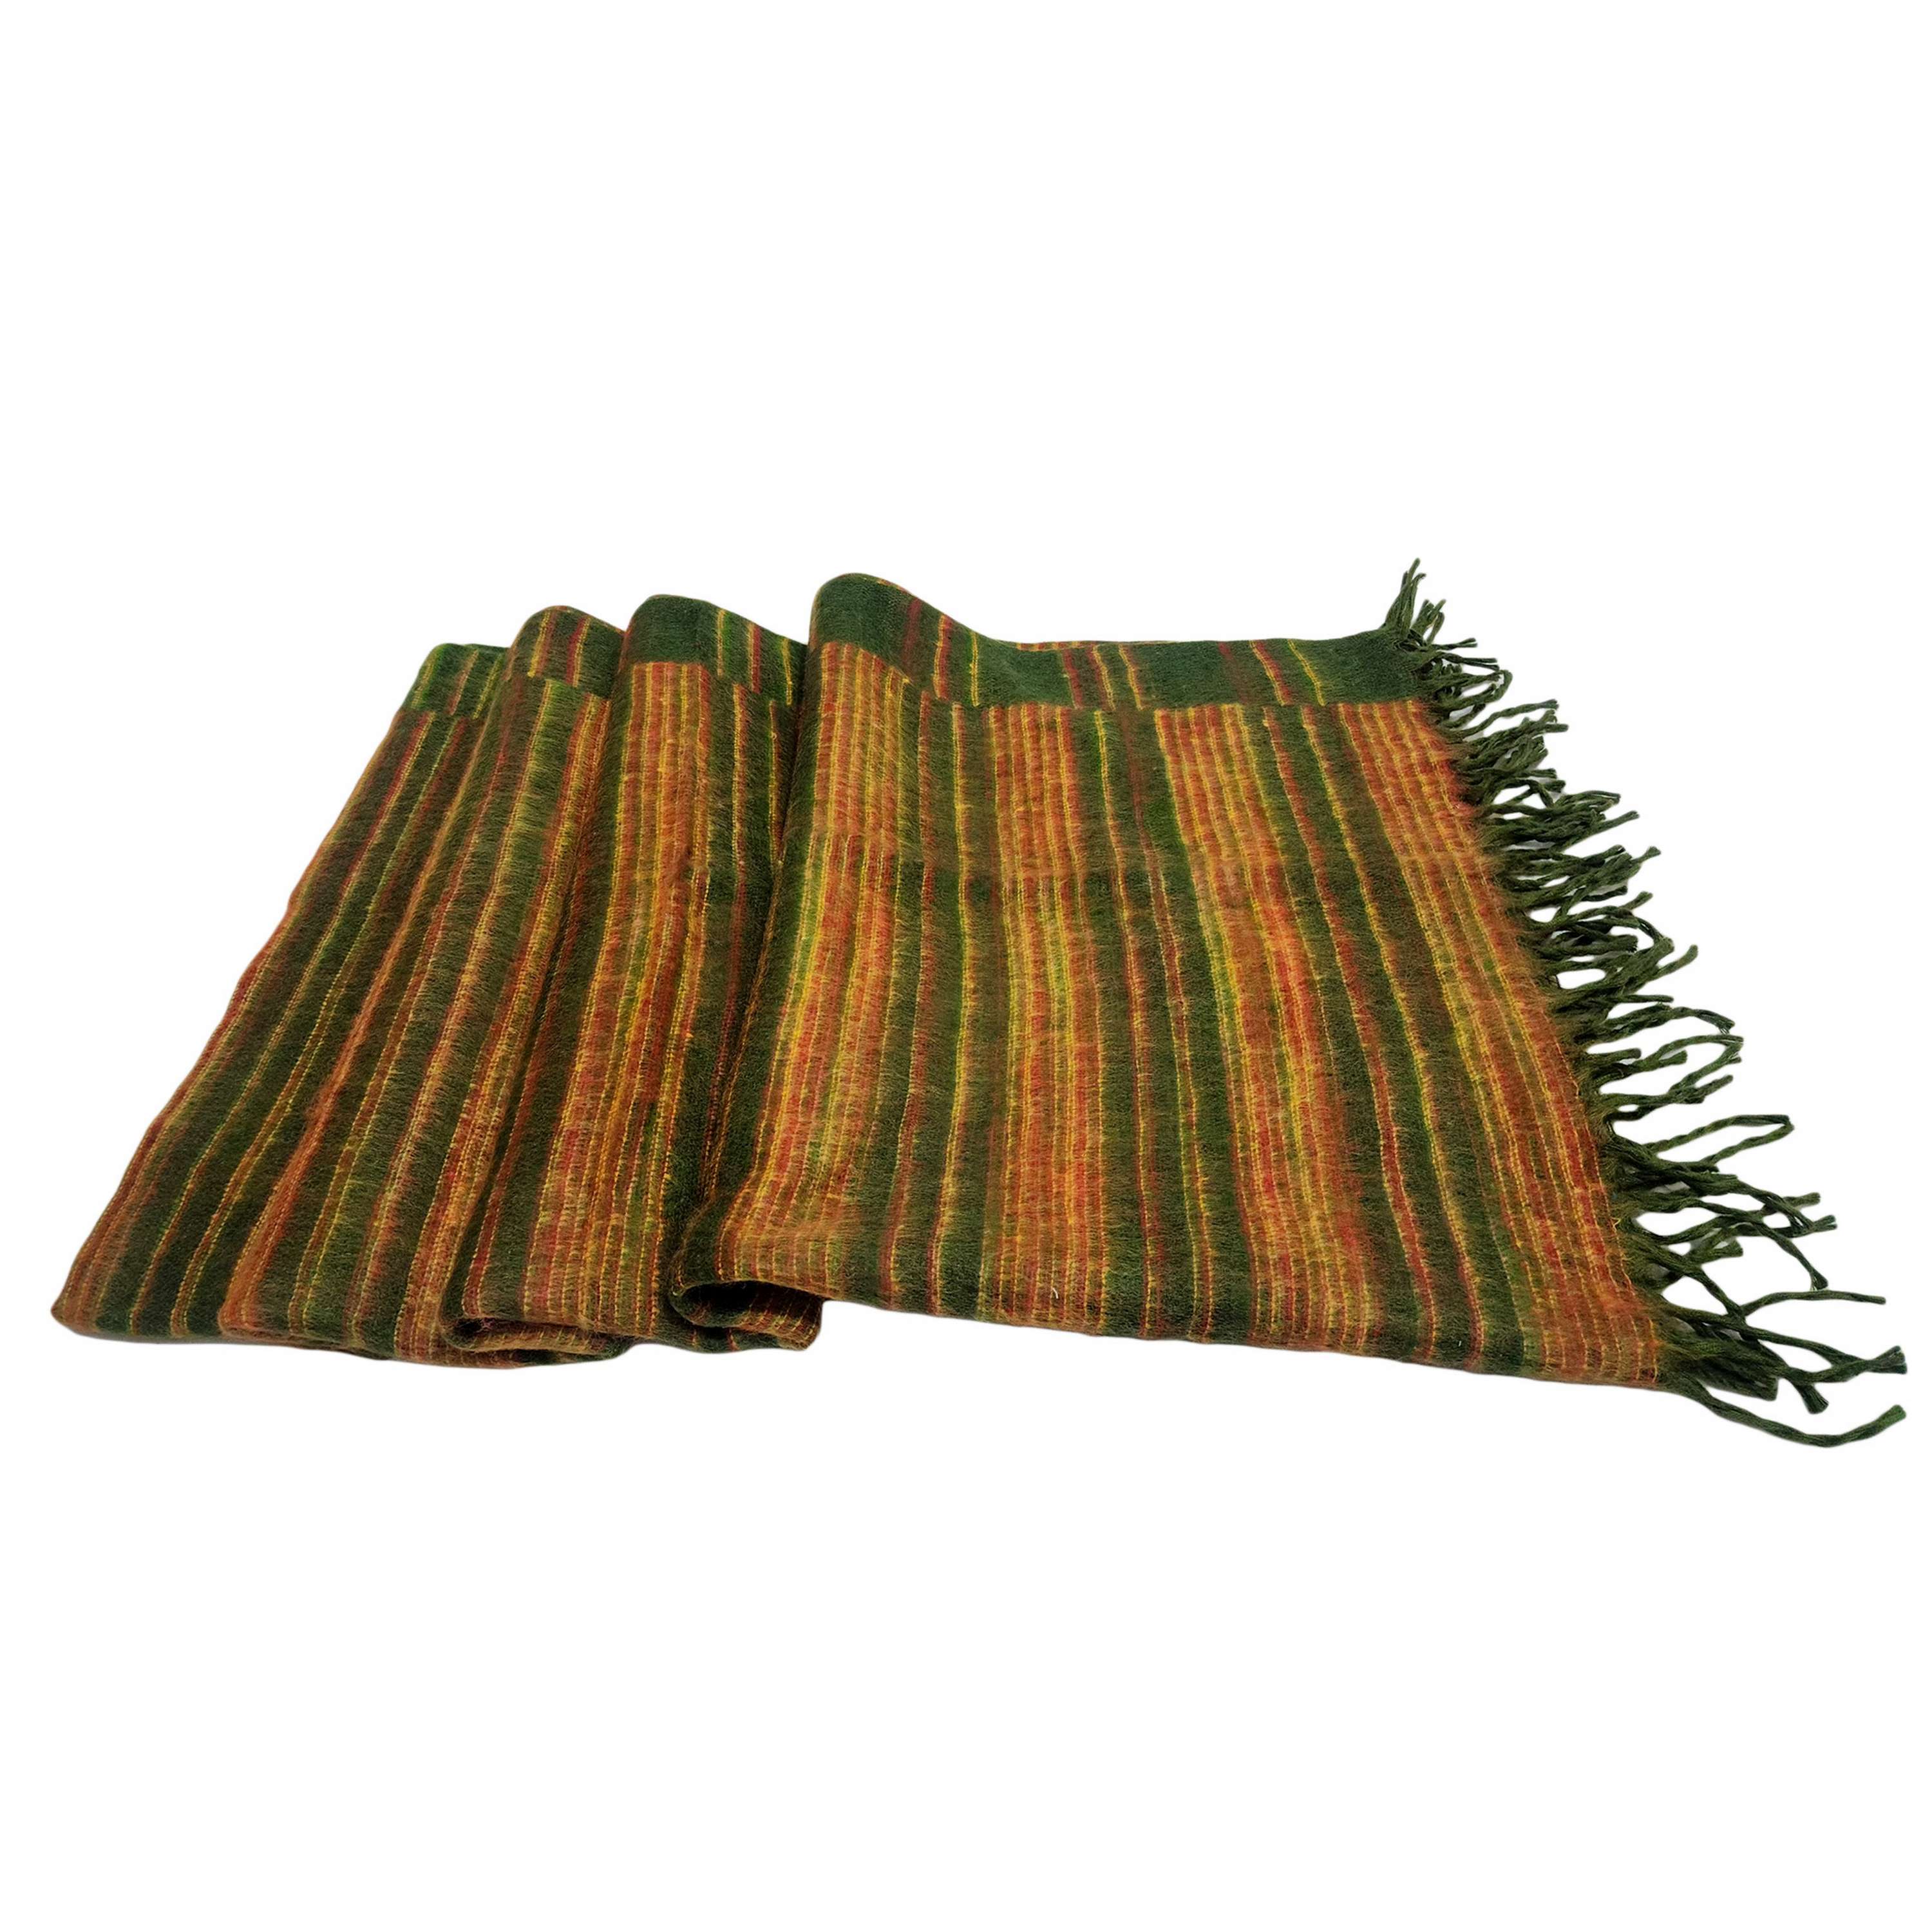 Tibet Shawl, Dress To Impress: Acrylic Woolen Shawls For Any Occasion, In Dark Forest Green Color <span Style=